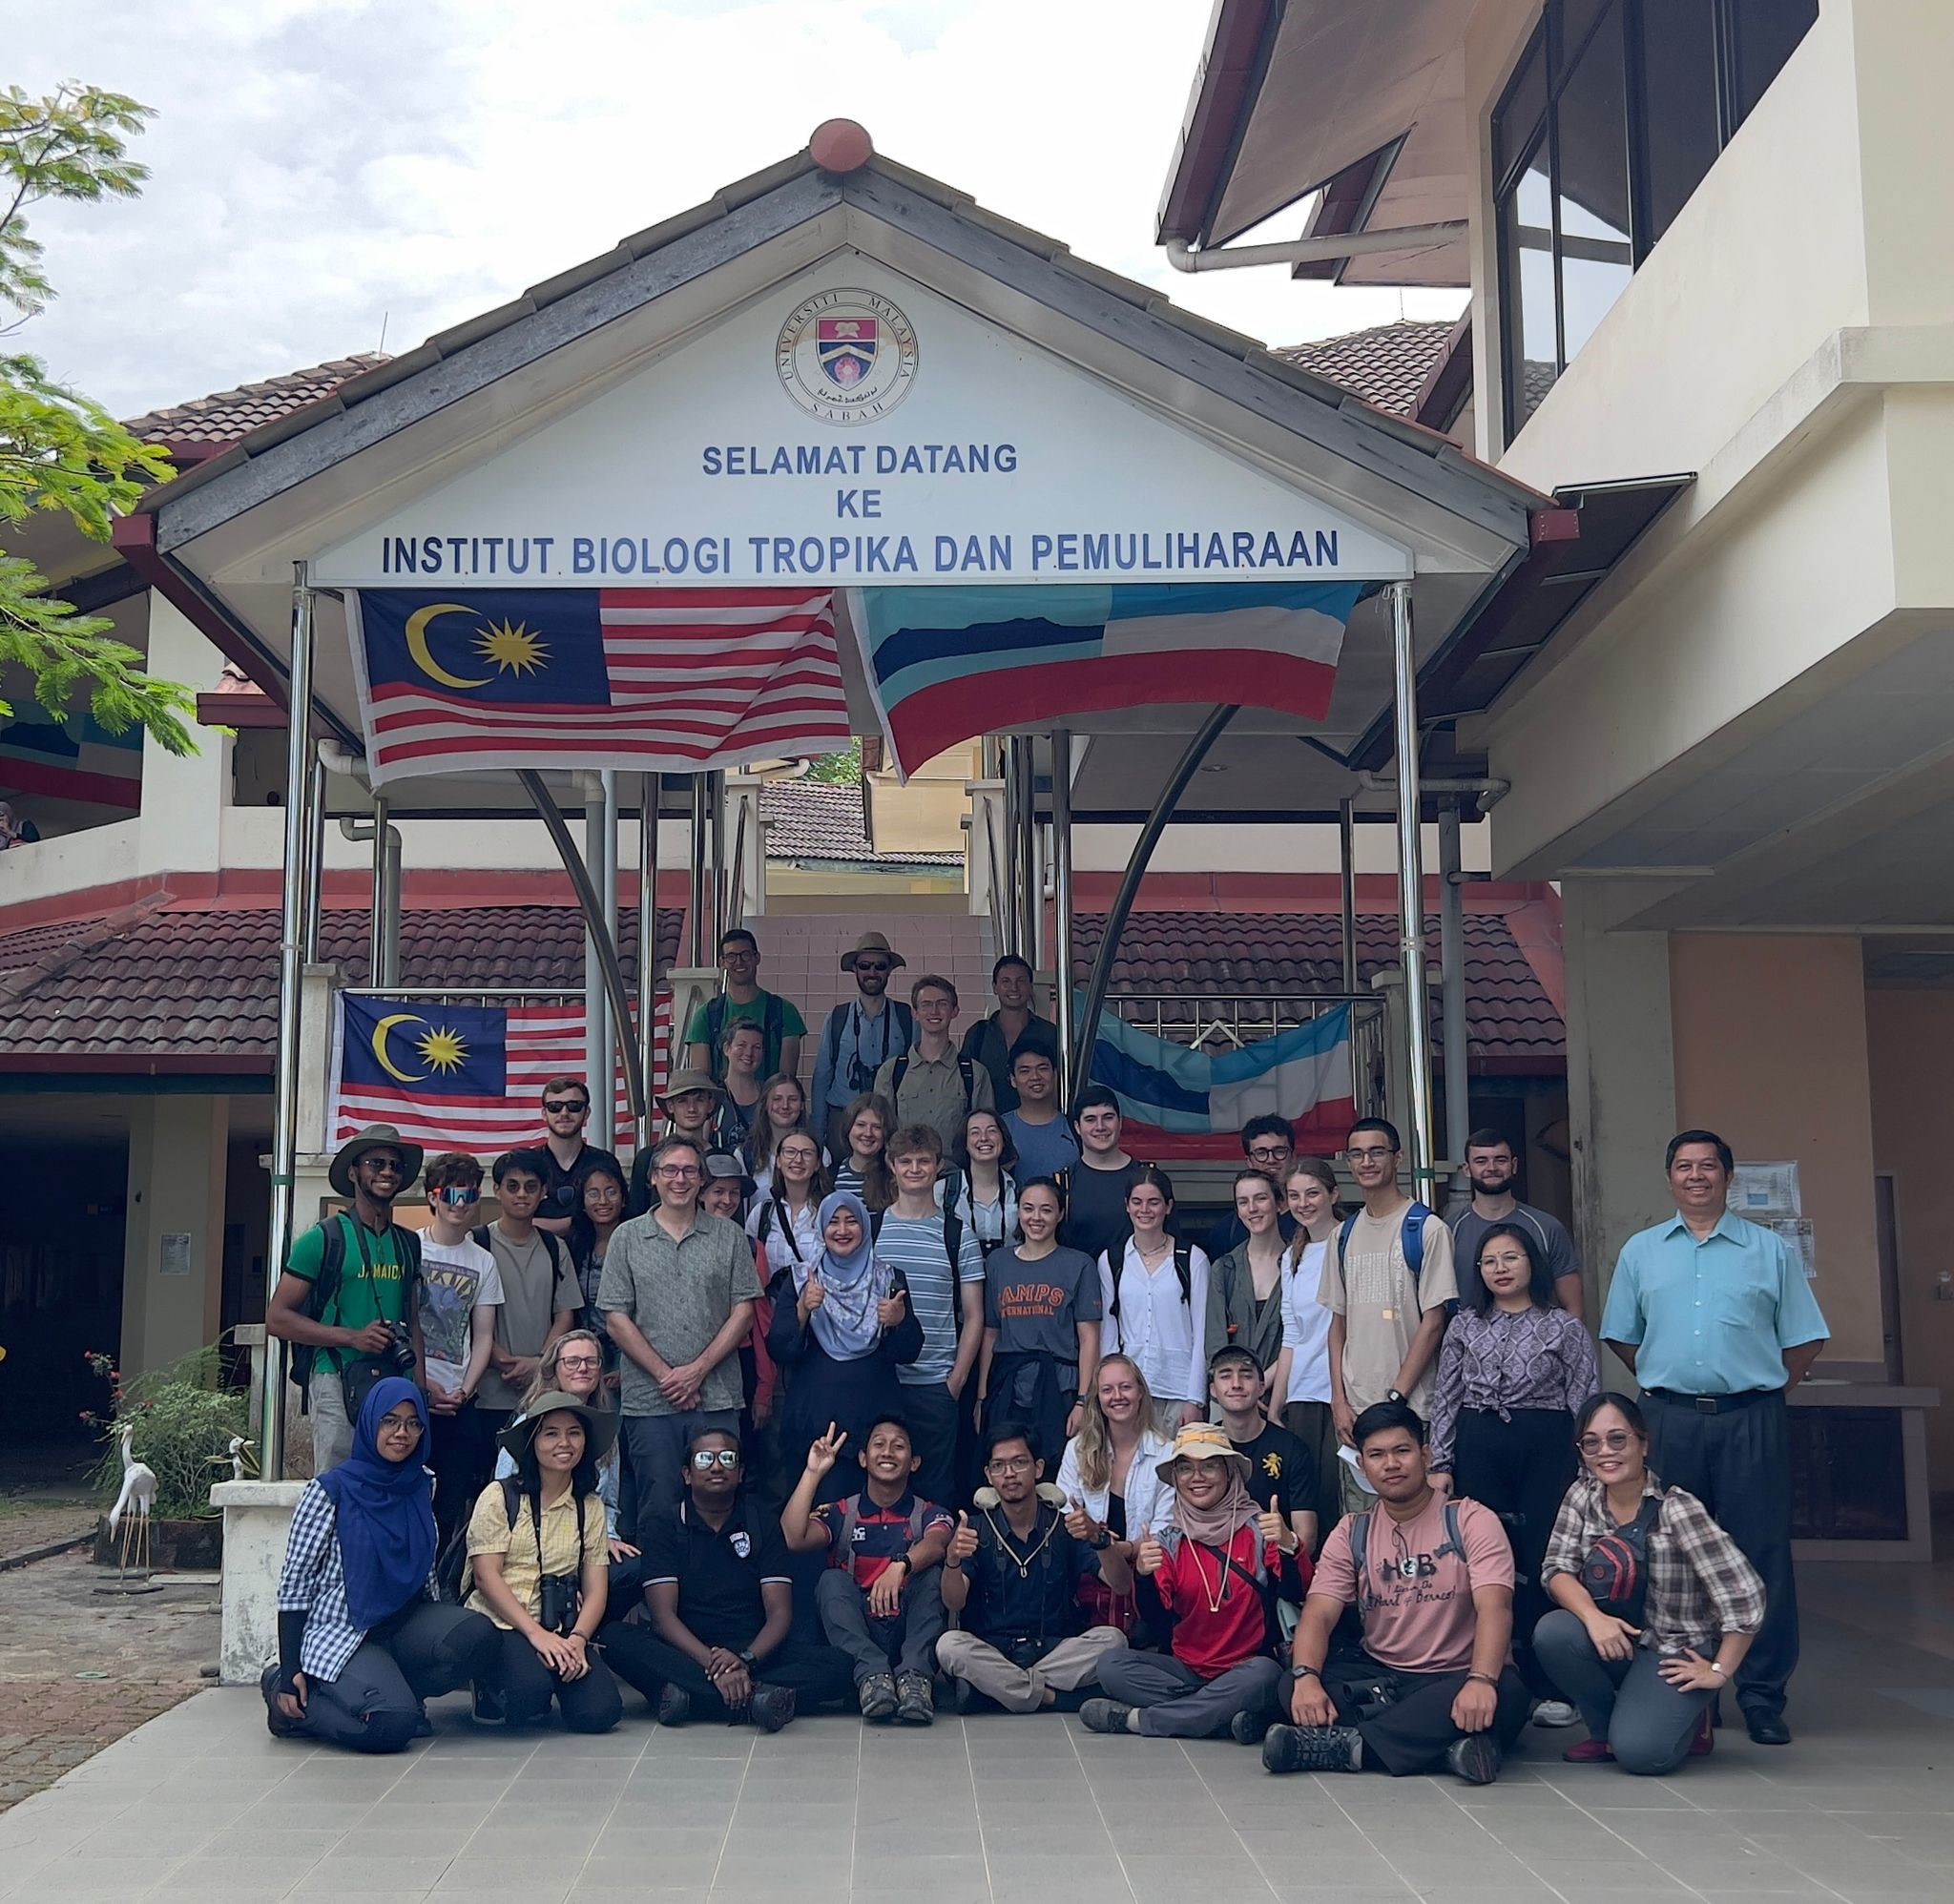 The whole group in front of the Institute for Tropical Biology and Conservation during our visit to University Sabah Malaysia where we looked through their specimen collections and received lectures from researchers. Credit: USM Staff